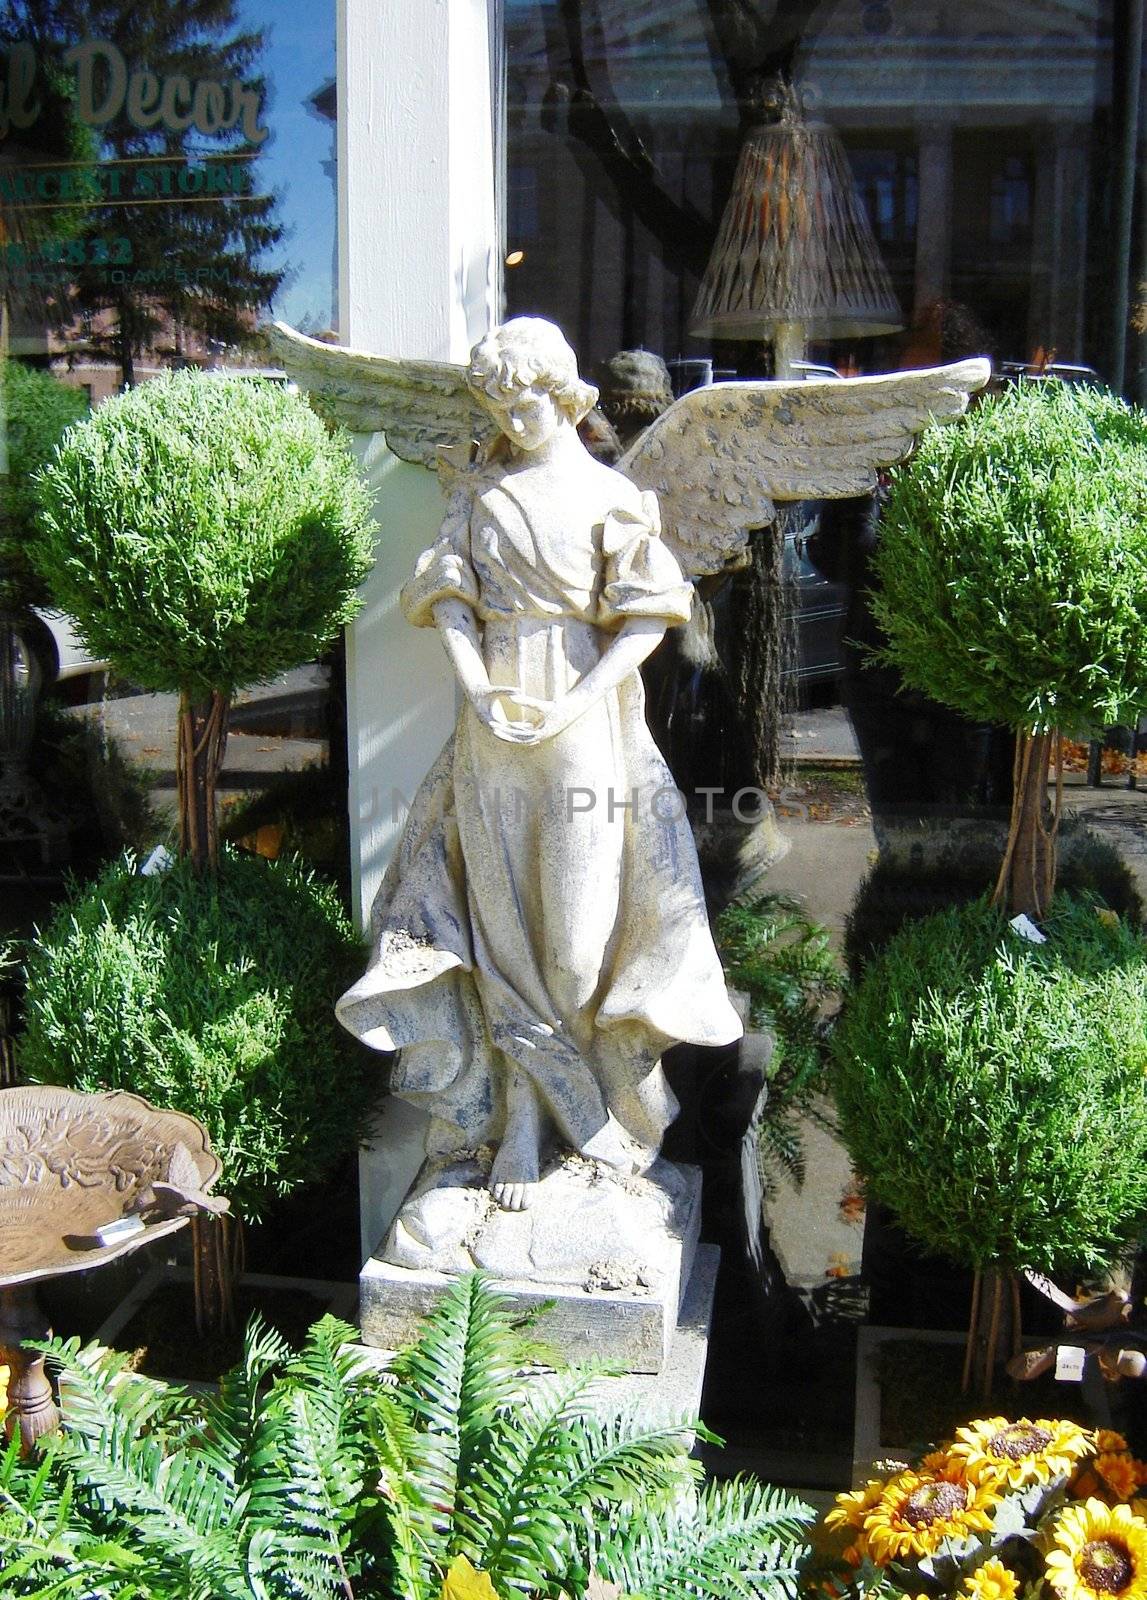 Angel with wings amongst shrubbery by RefocusPhoto